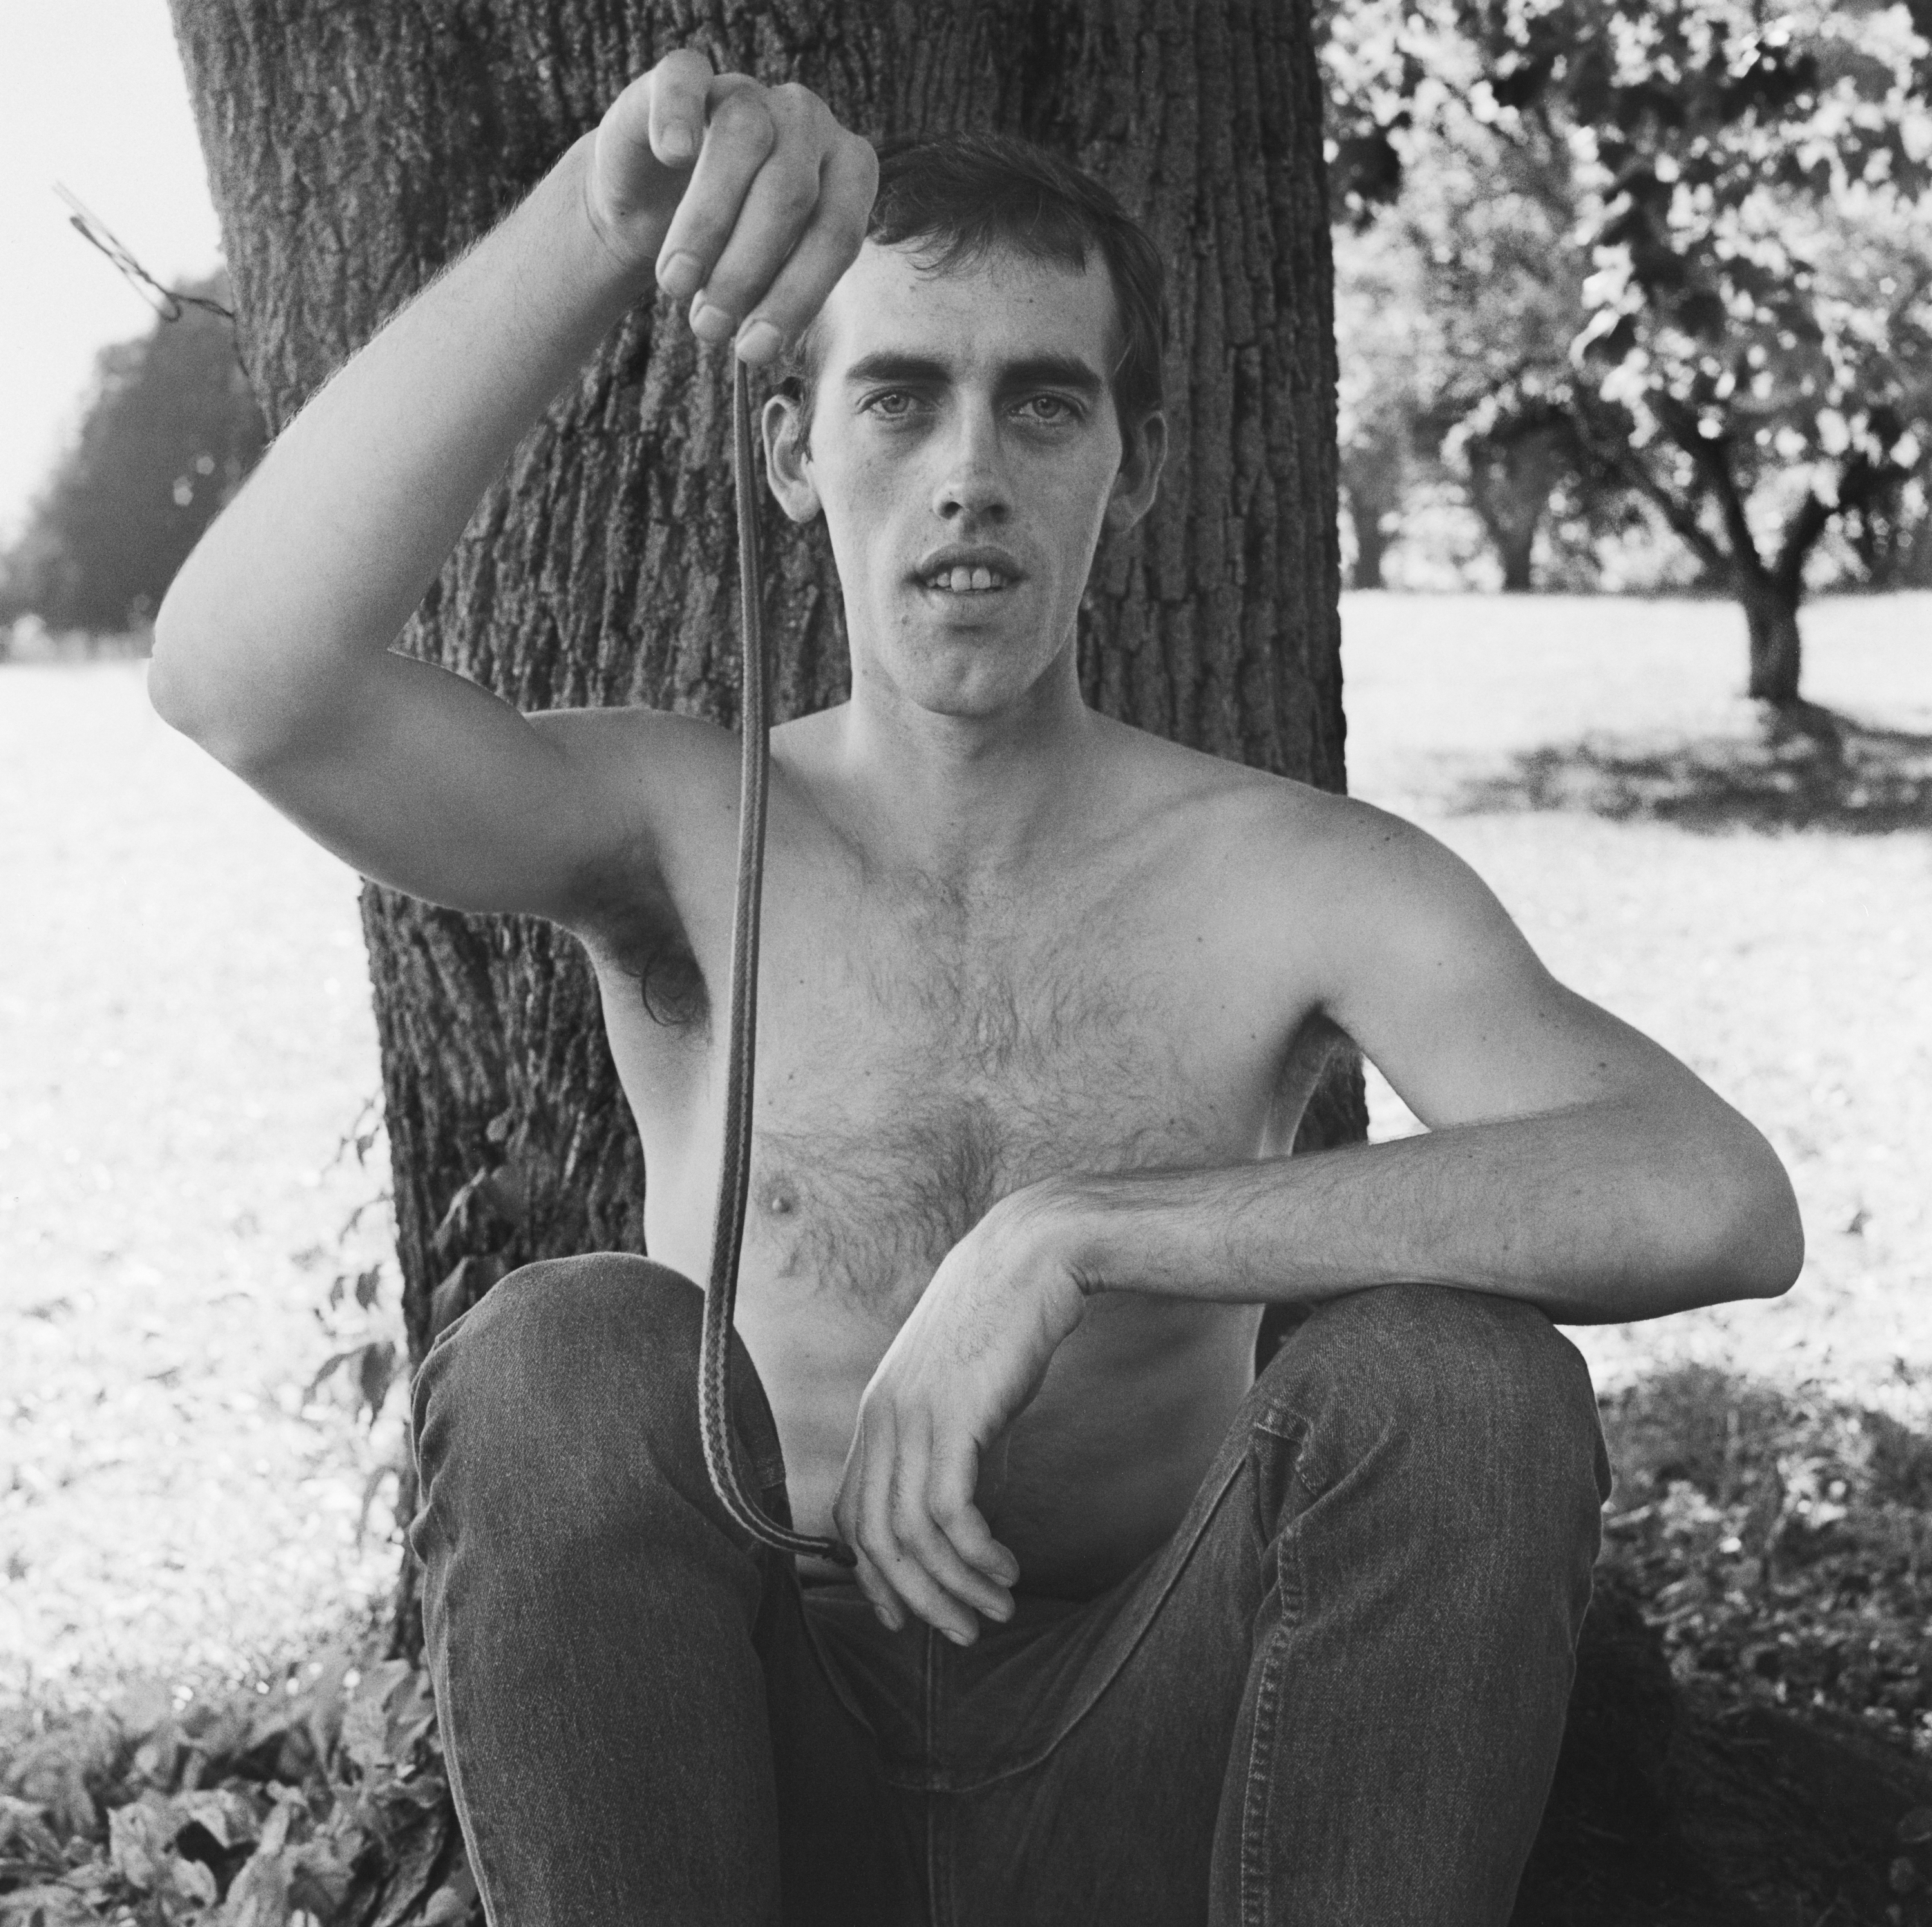 Black and white photograph of a shirtless male figure seating at the base of a tree and holding a snake